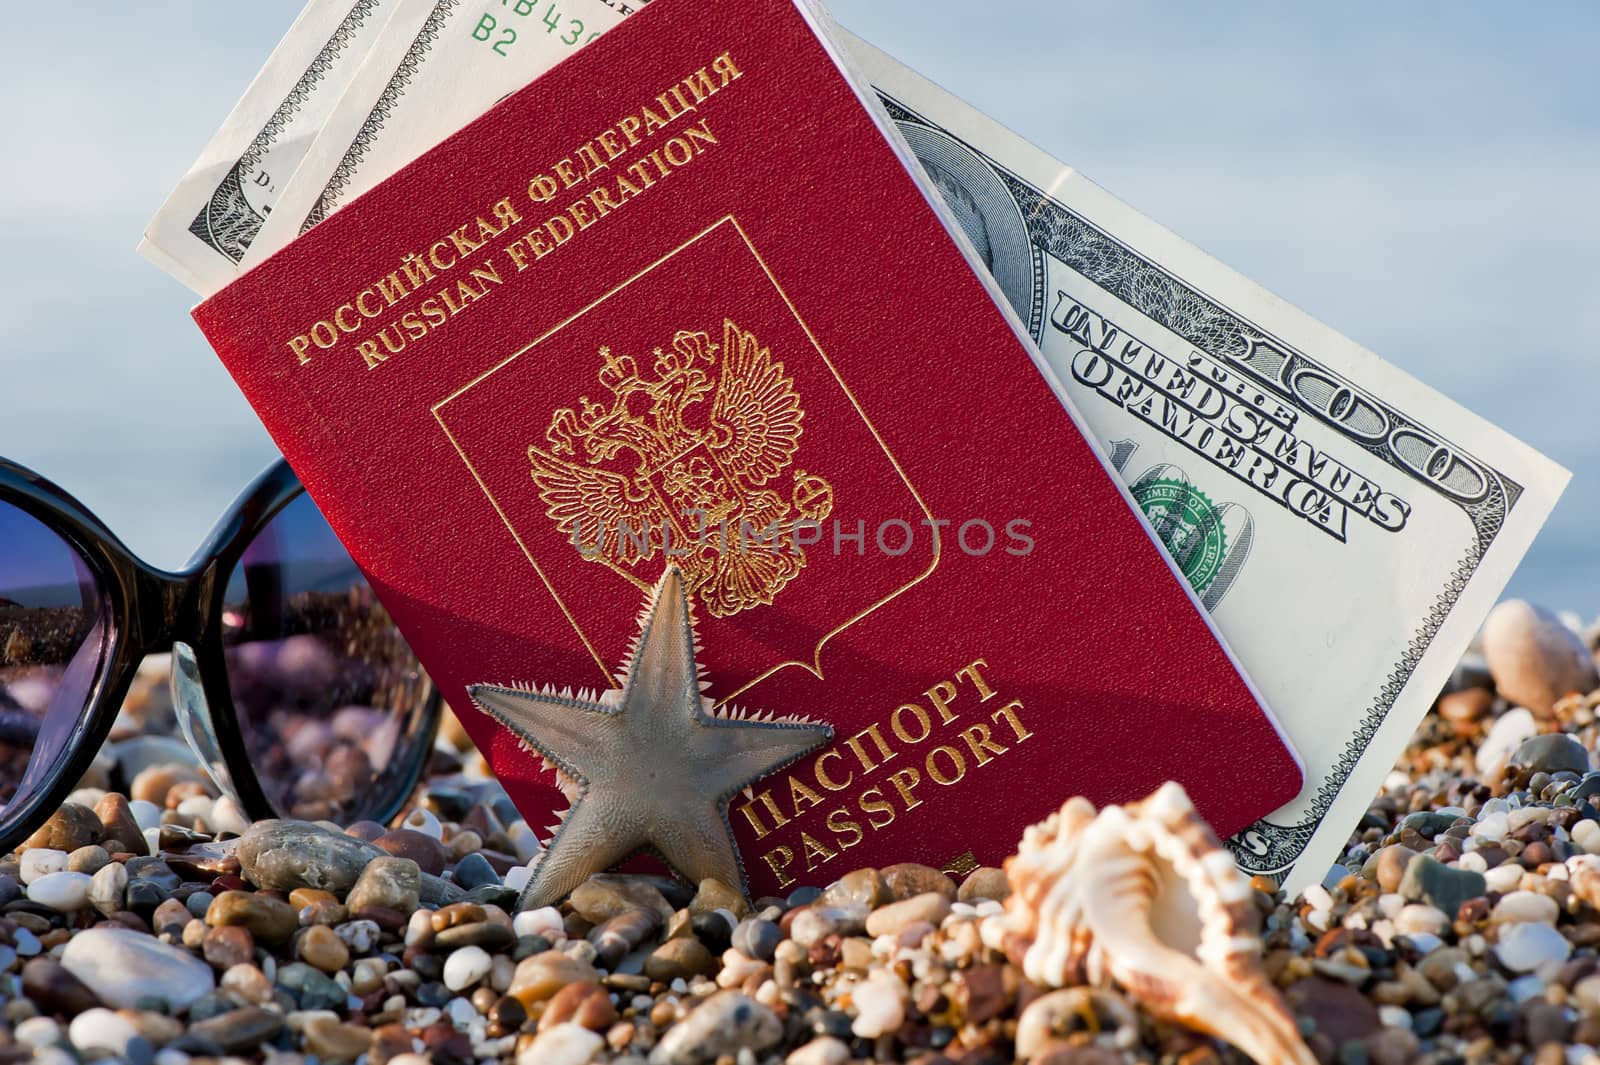 Still traveling with a Russian passport in the sand on the beach